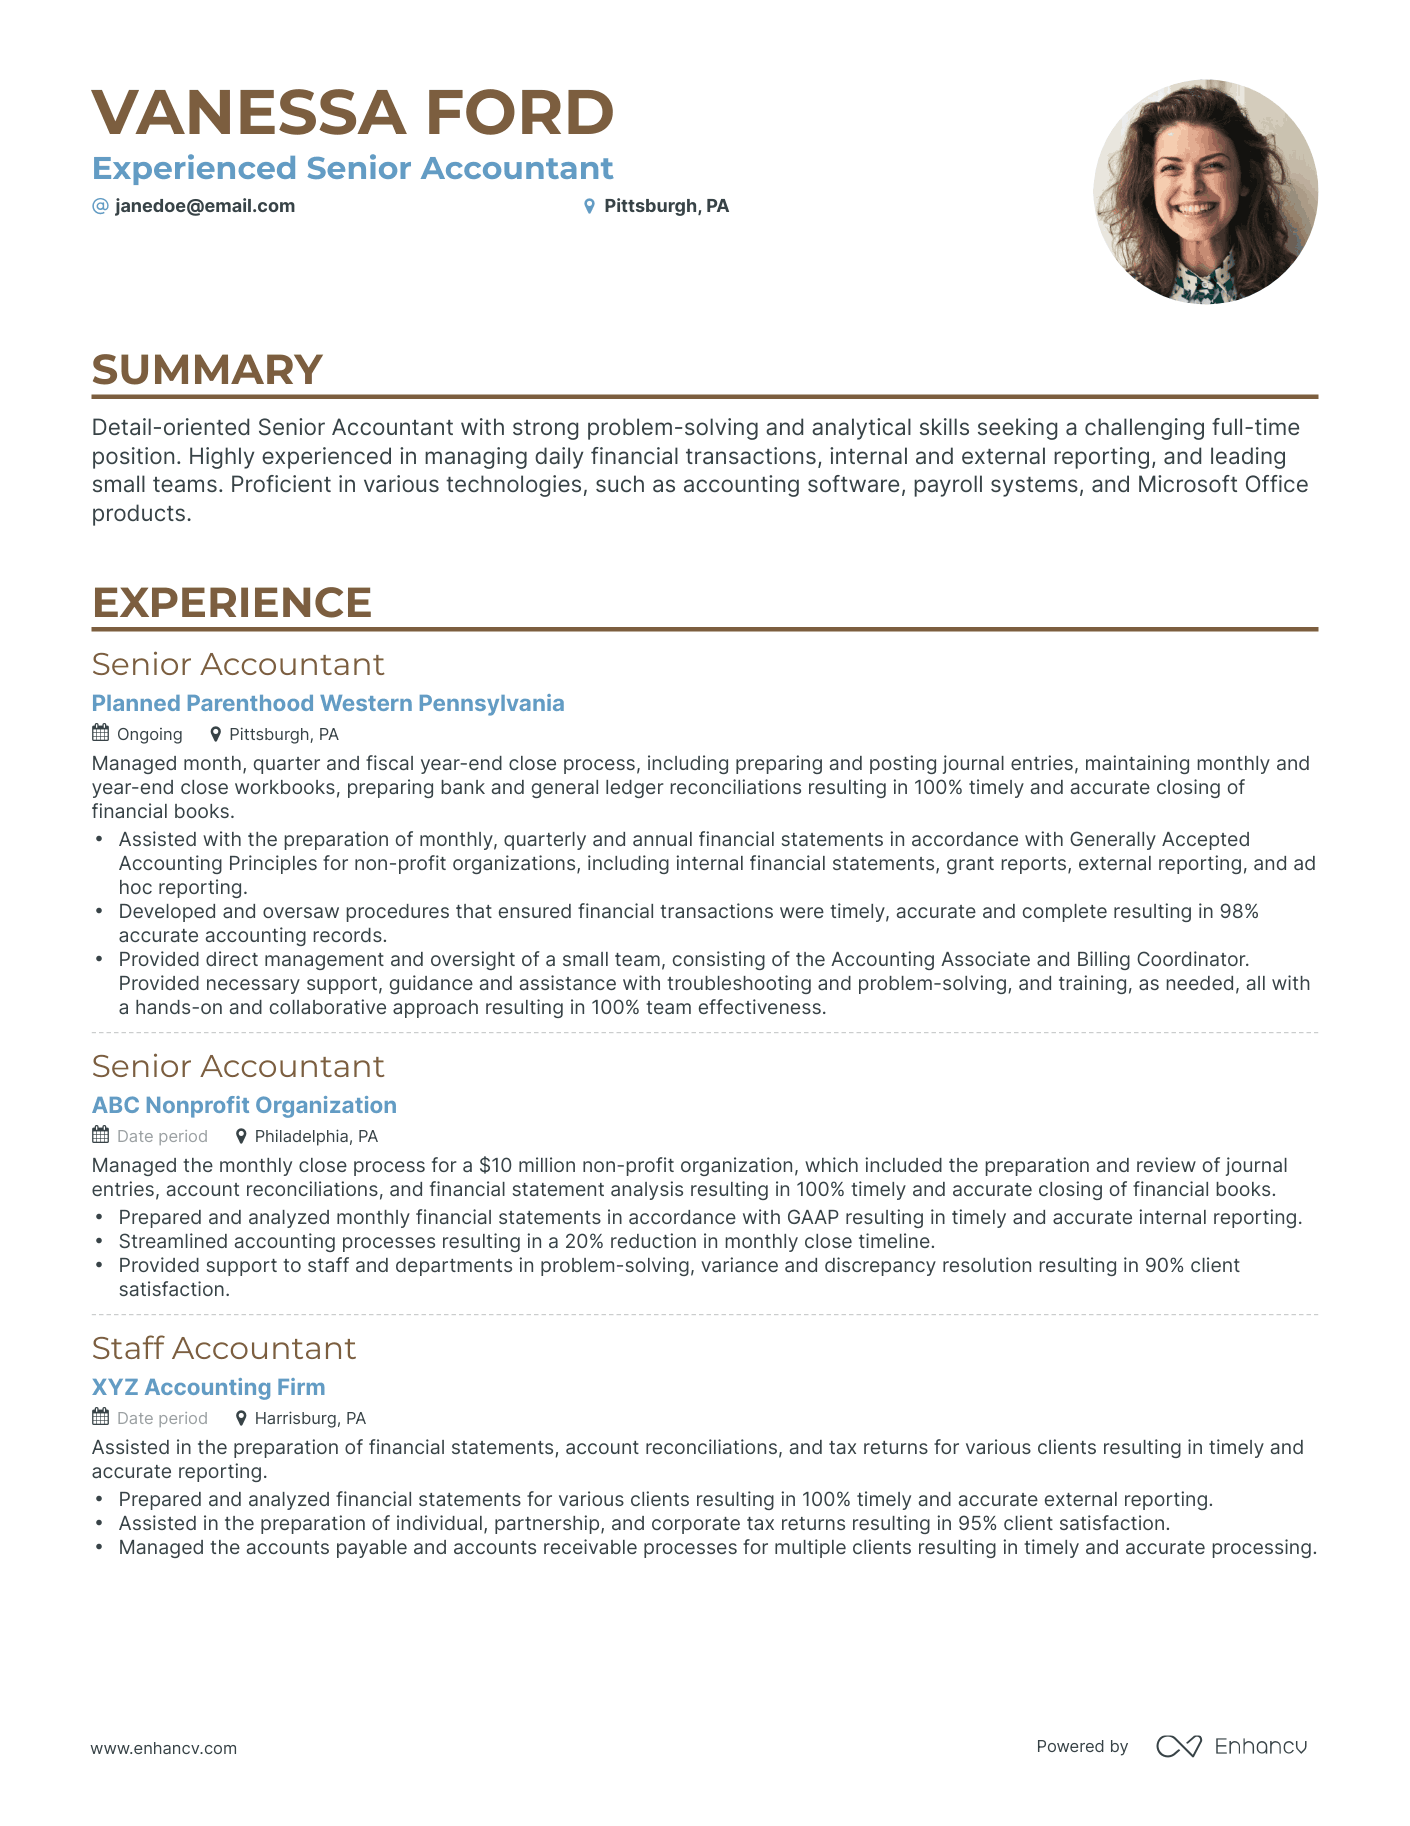 Classic Full Cycle Accounting Resume Template